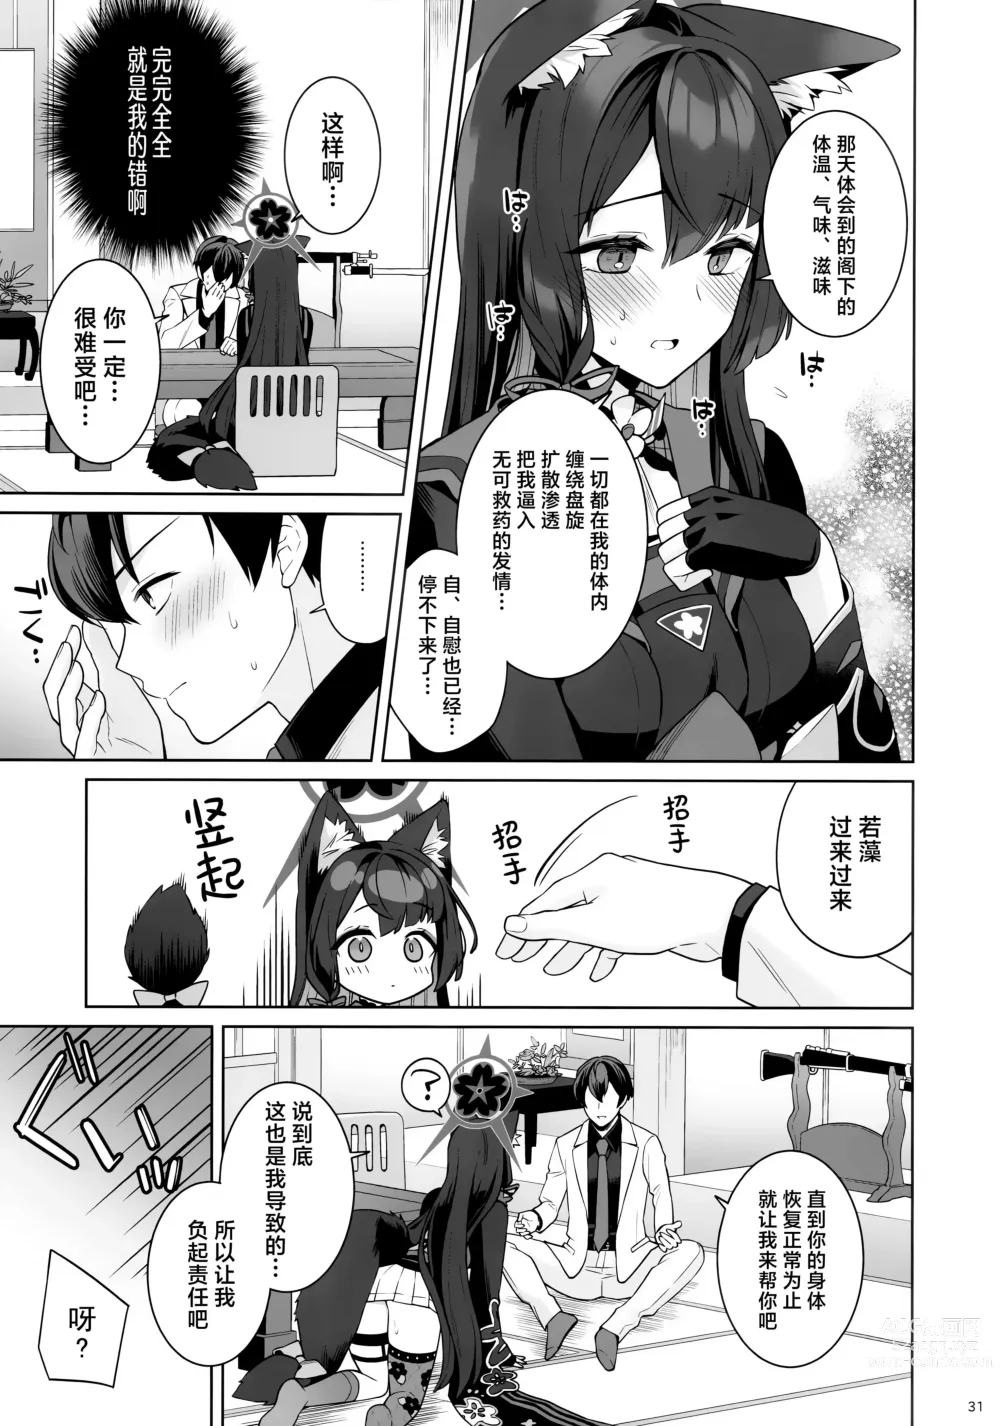 Page 30 of doujinshi 纯情·恋情·发情狐